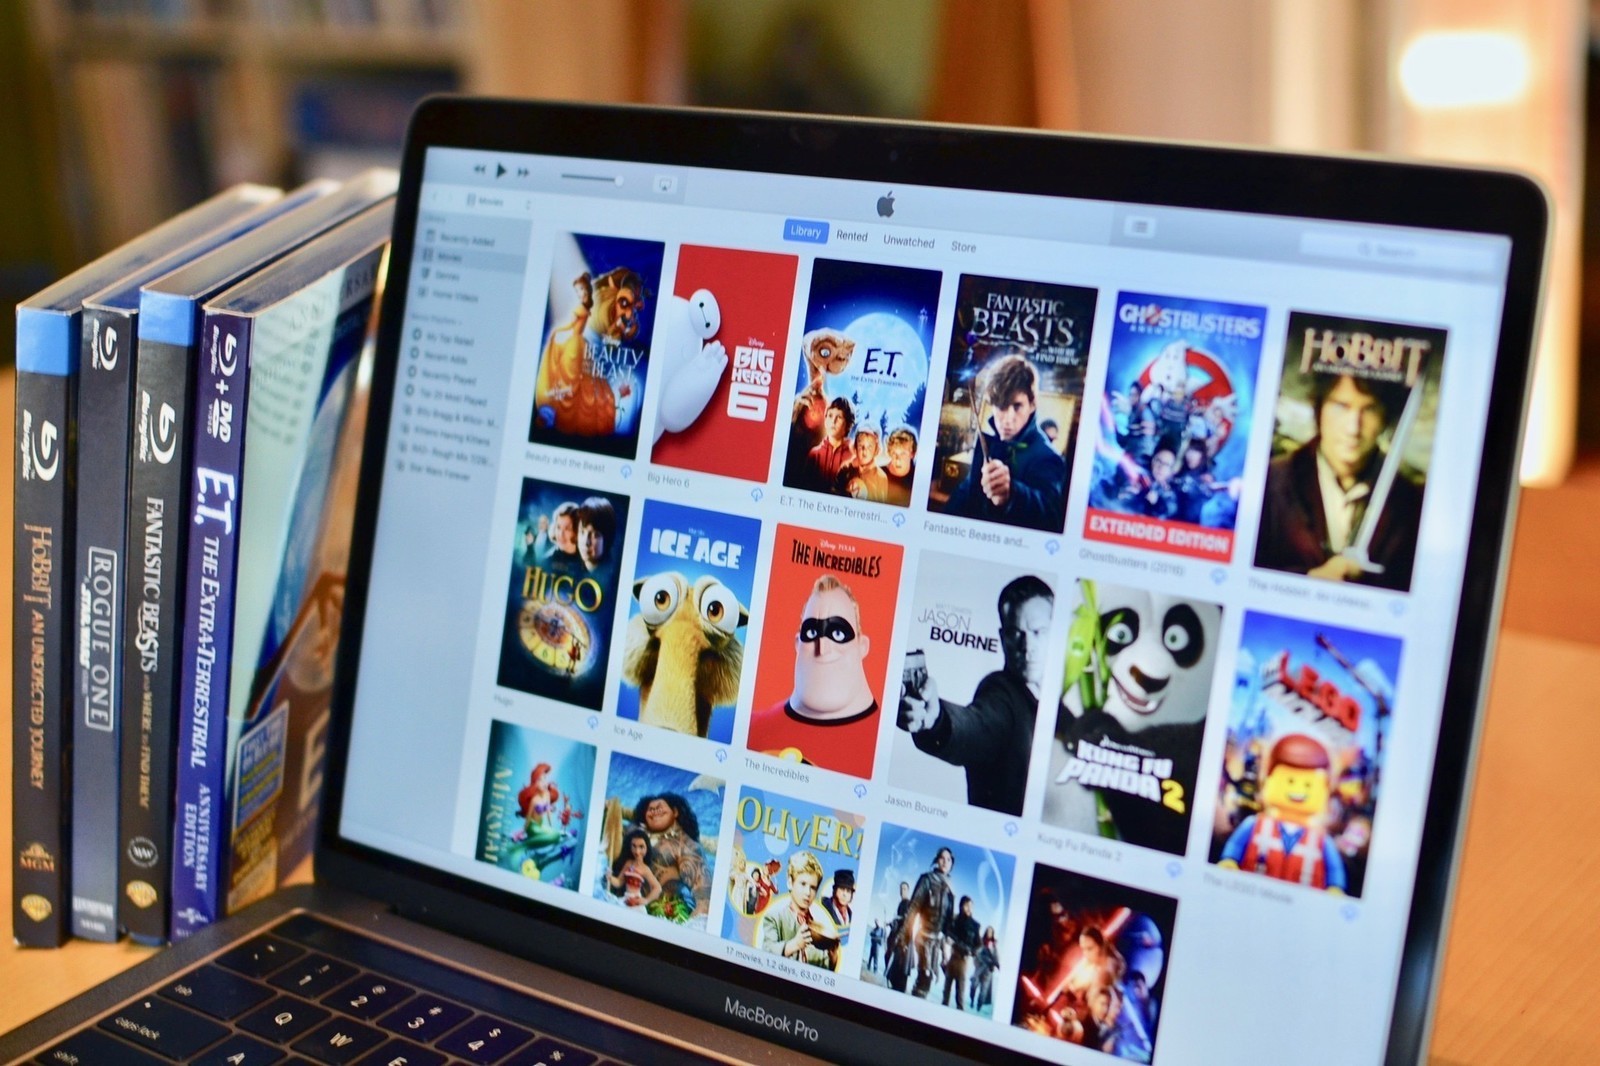 free movies for mac